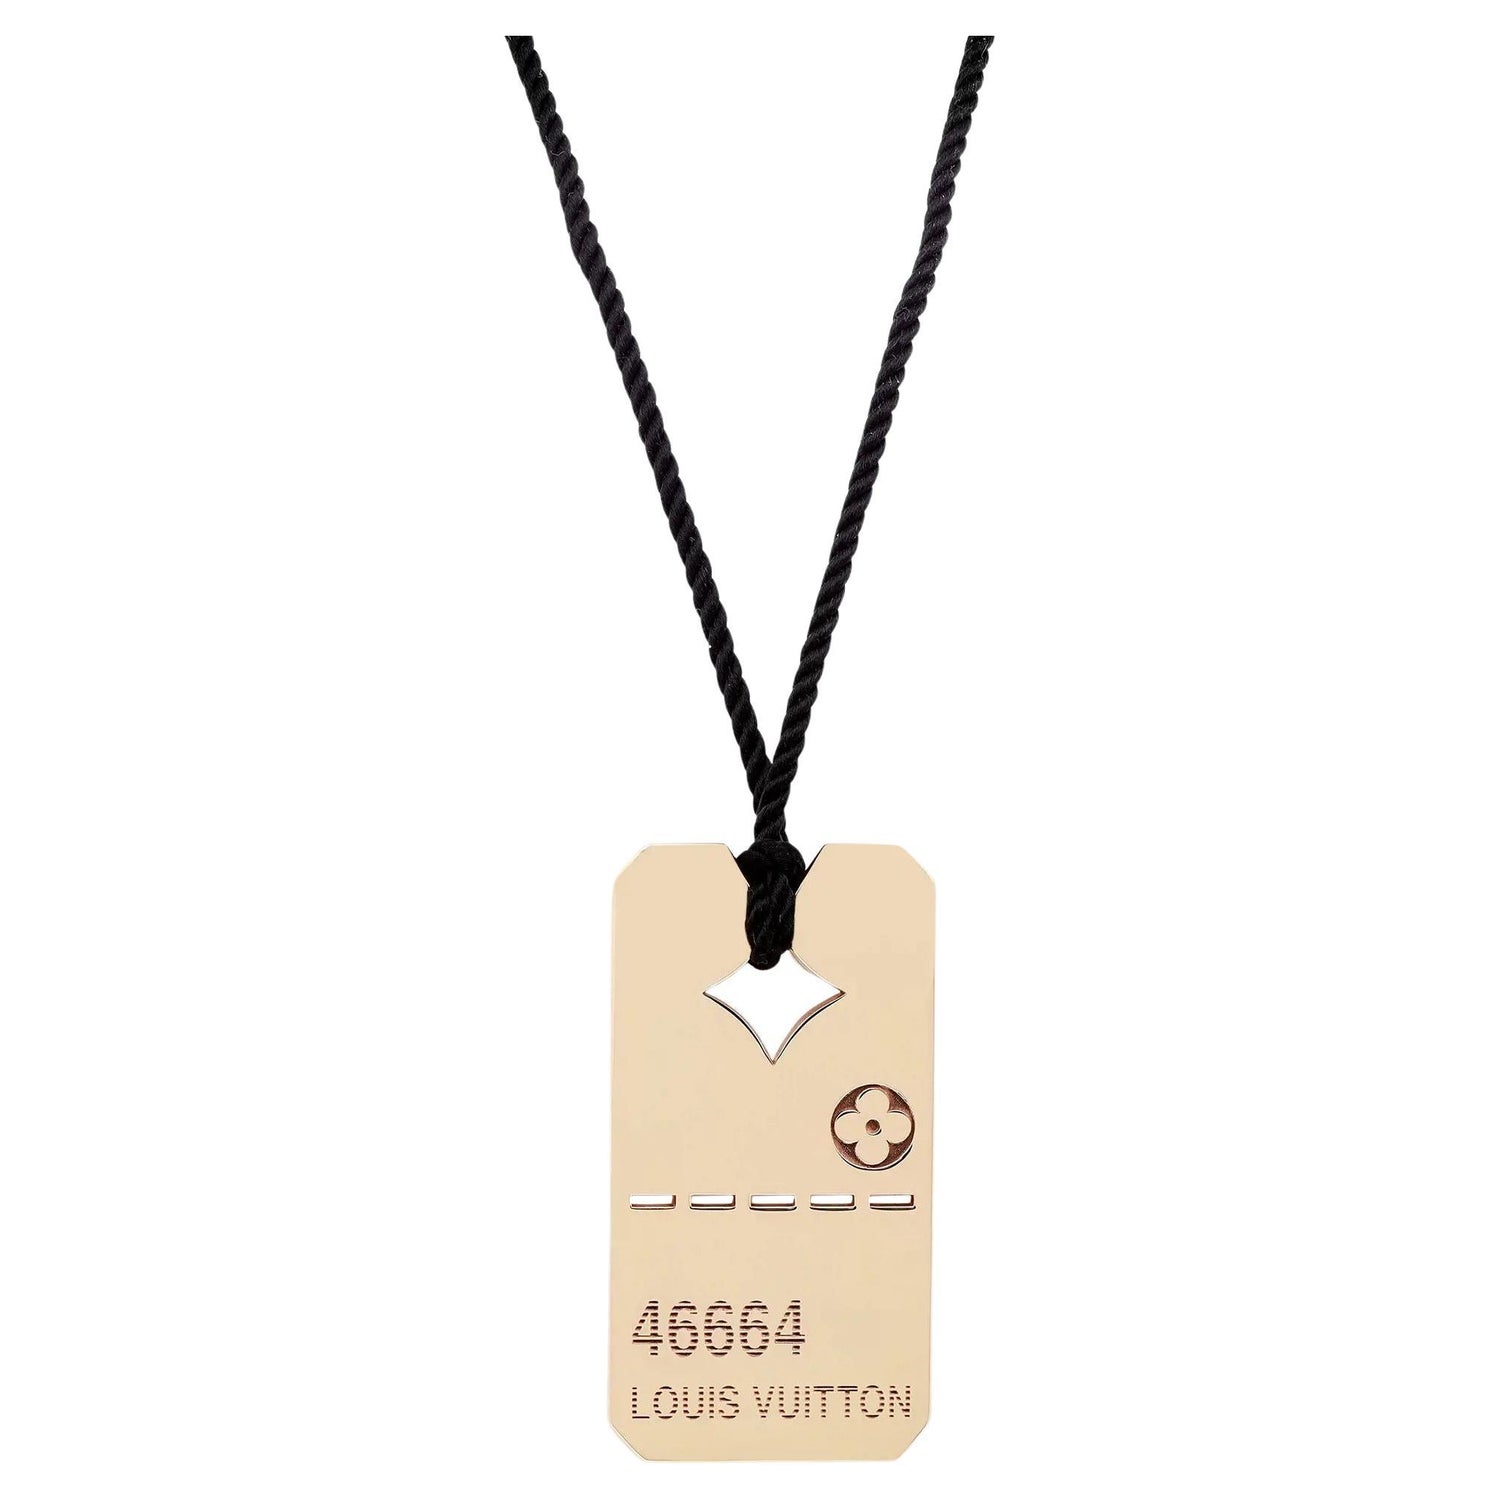 LOUIS VUITTON Sterling Silver LV Dog Tag Necklace 201722